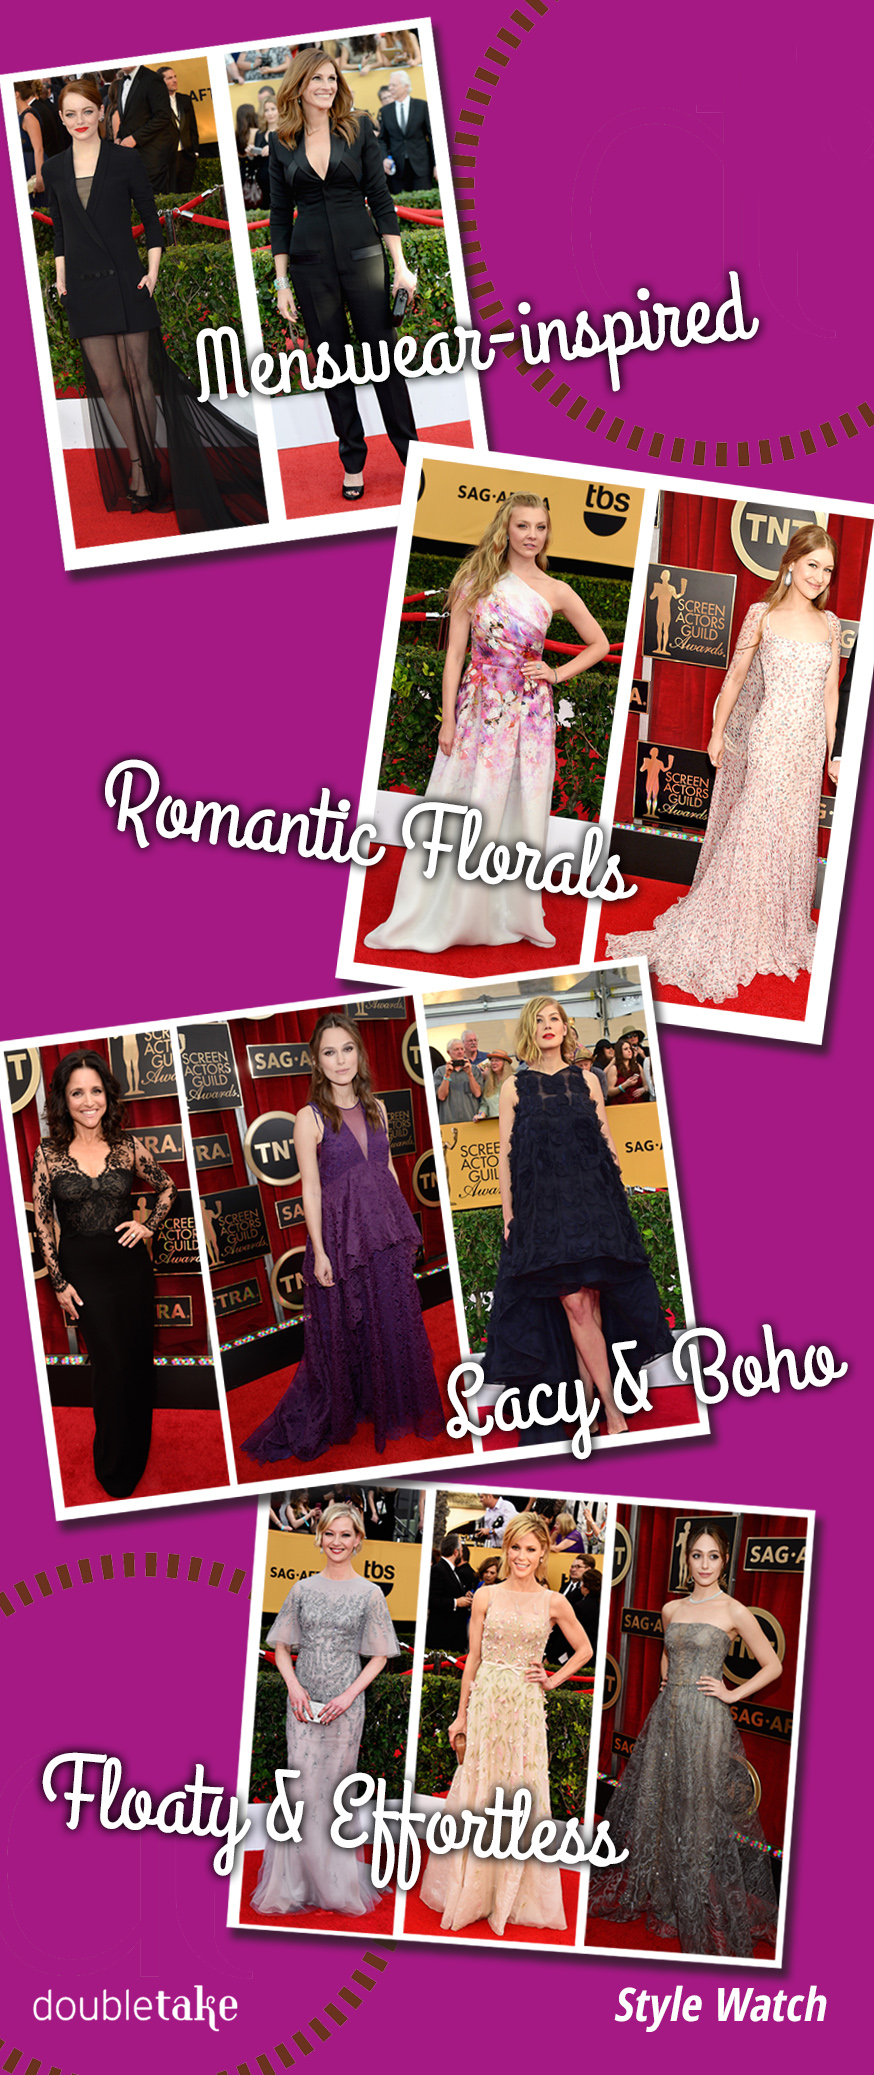 StyleWatch: Top Ten Picks from the SAG Awards 2015